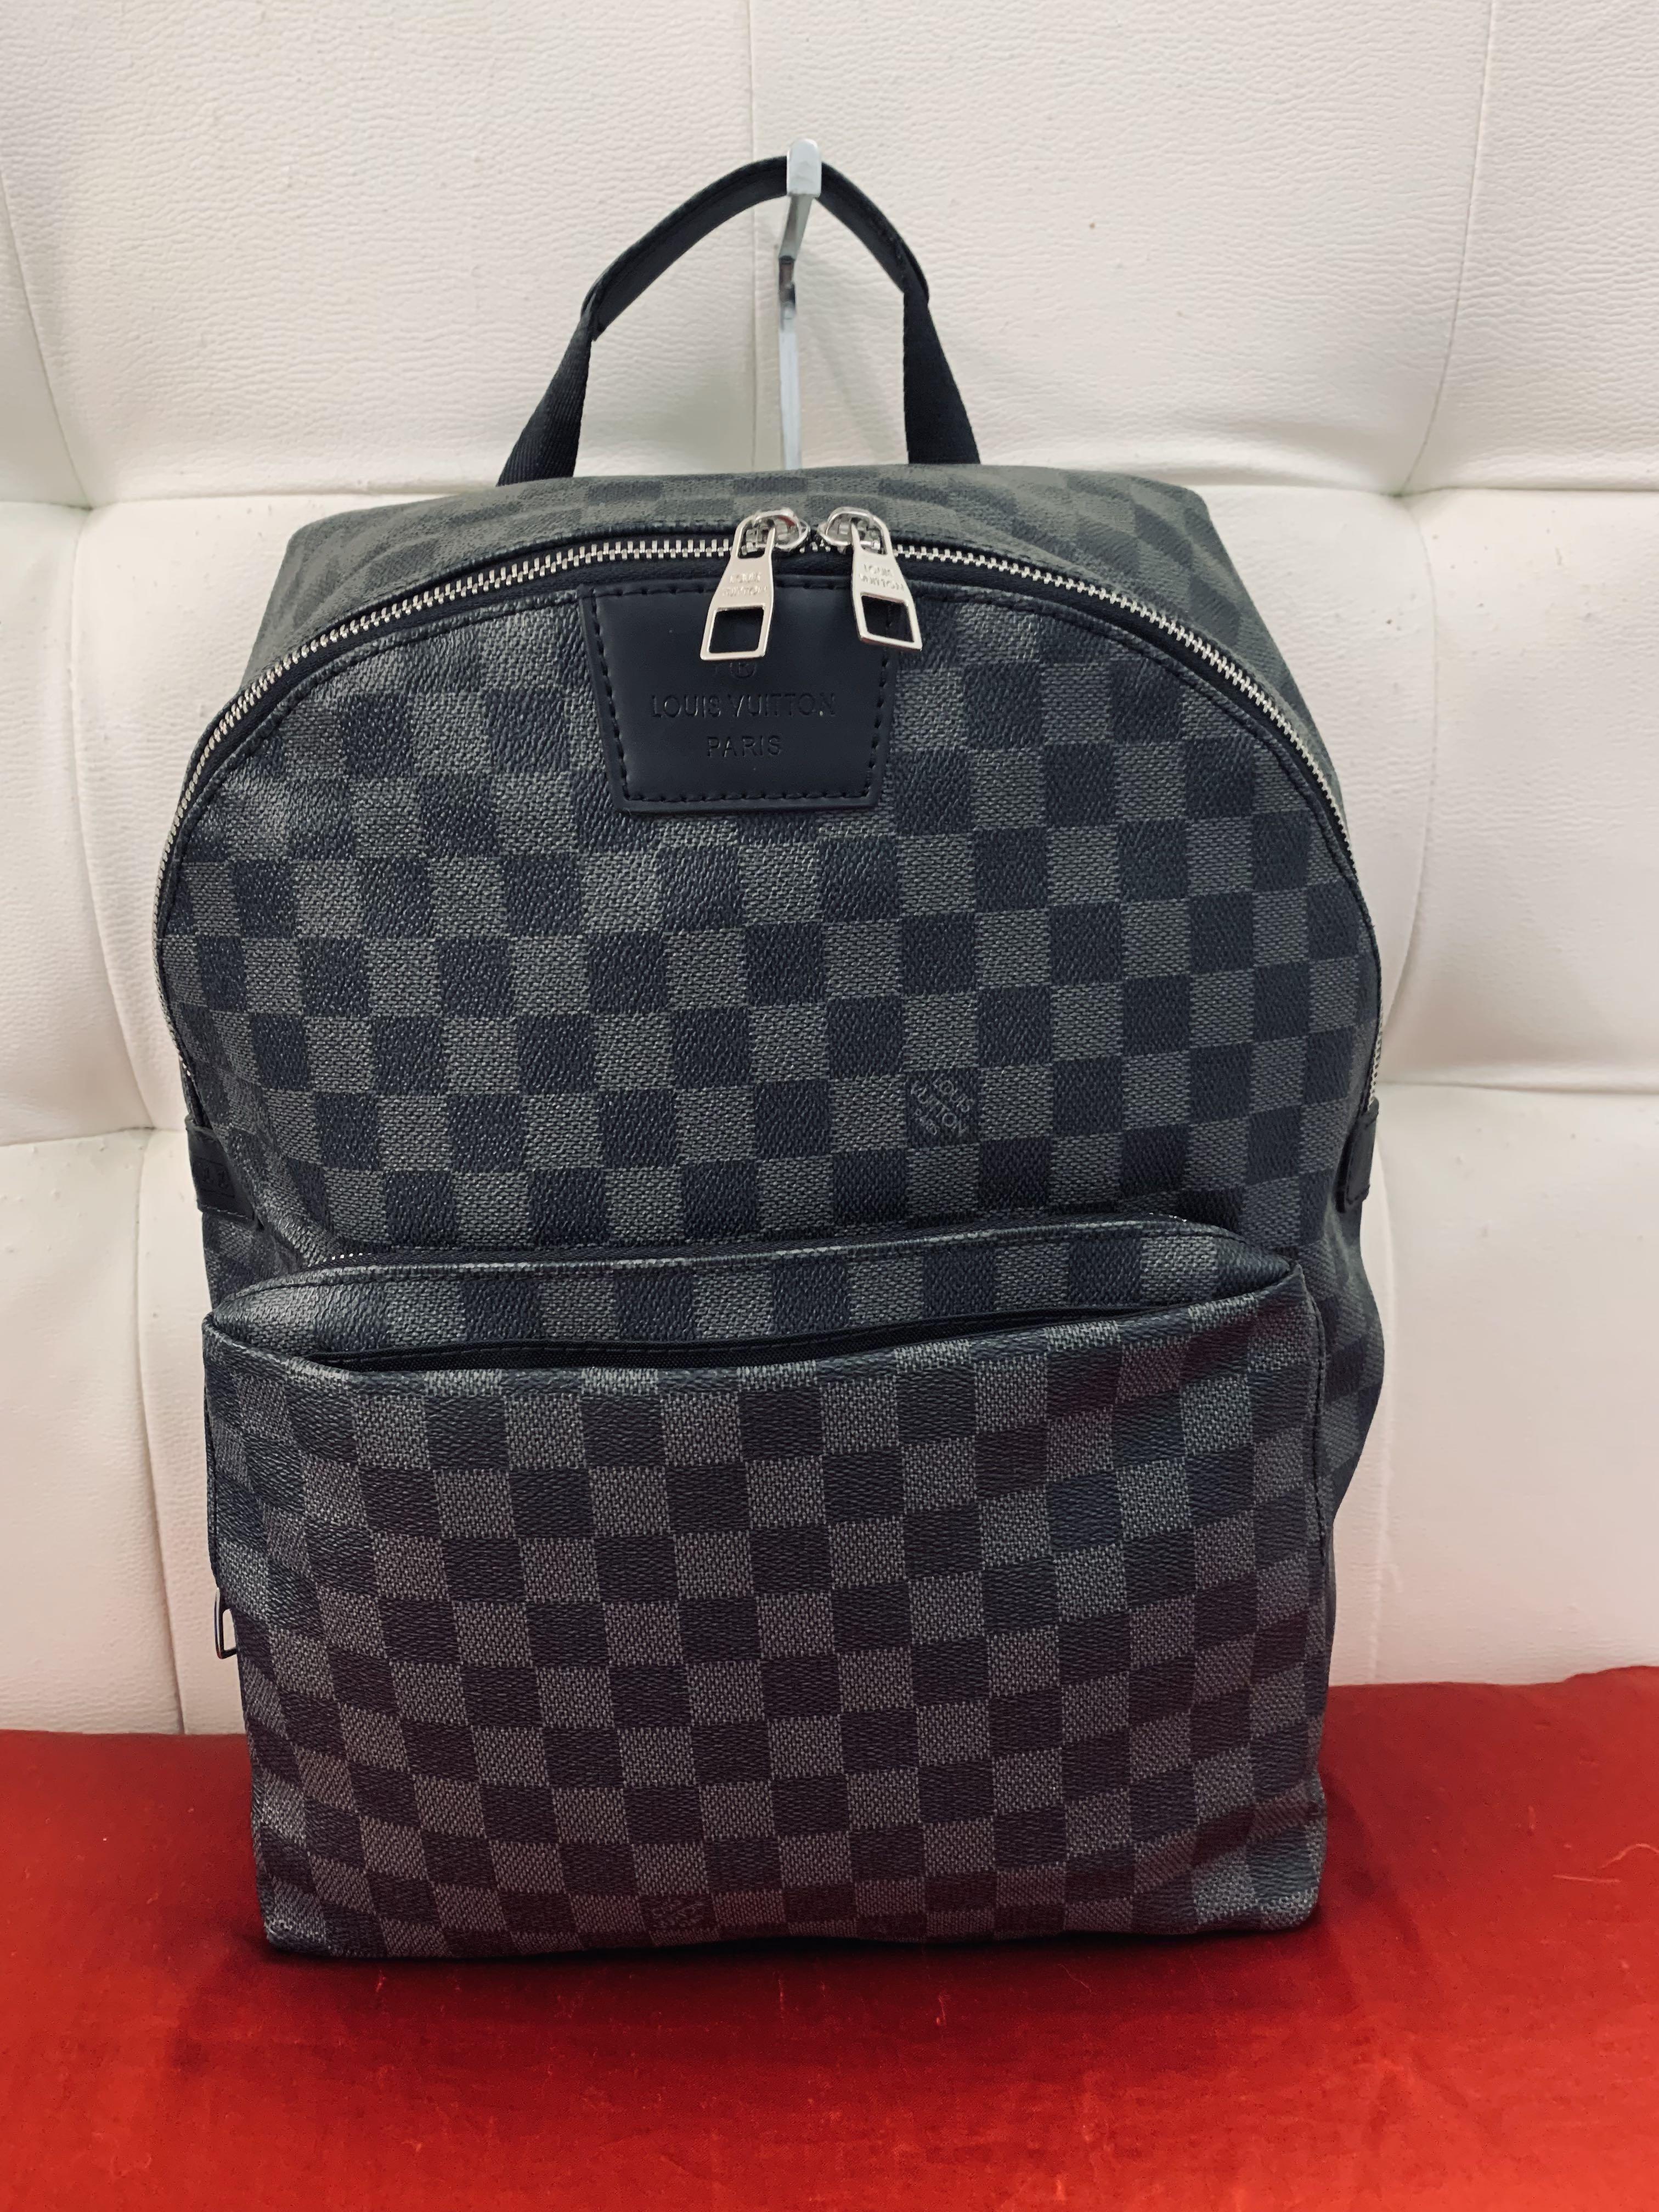 Pouches beg lv, Men's Fashion, Bags, Backpacks on Carousell